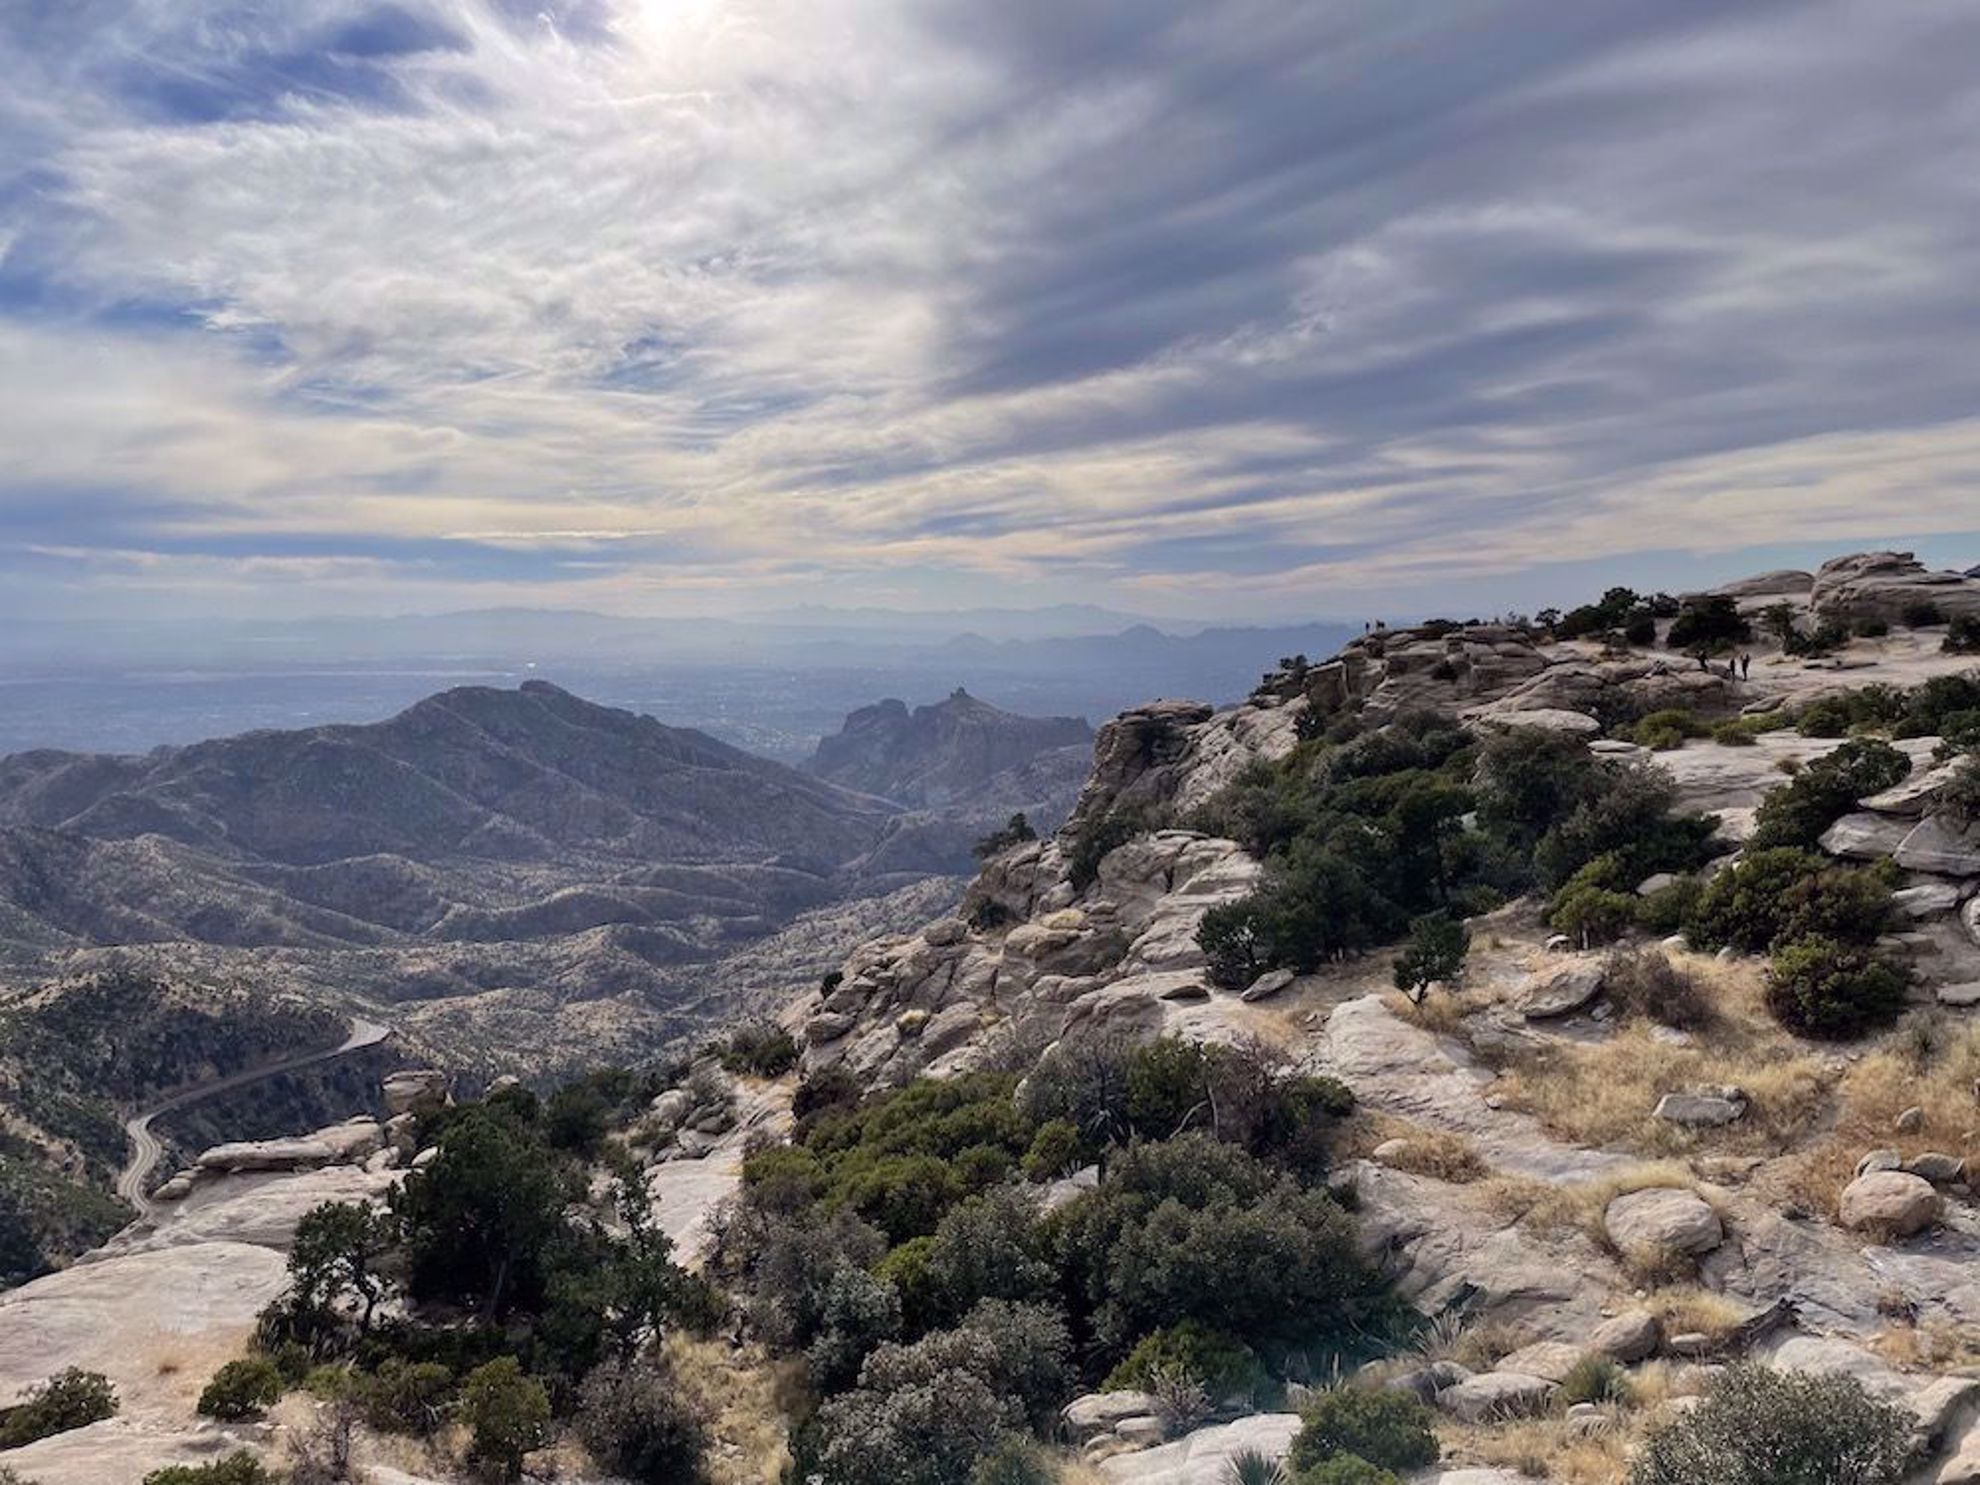 View from slopes of Mt. Lemmon